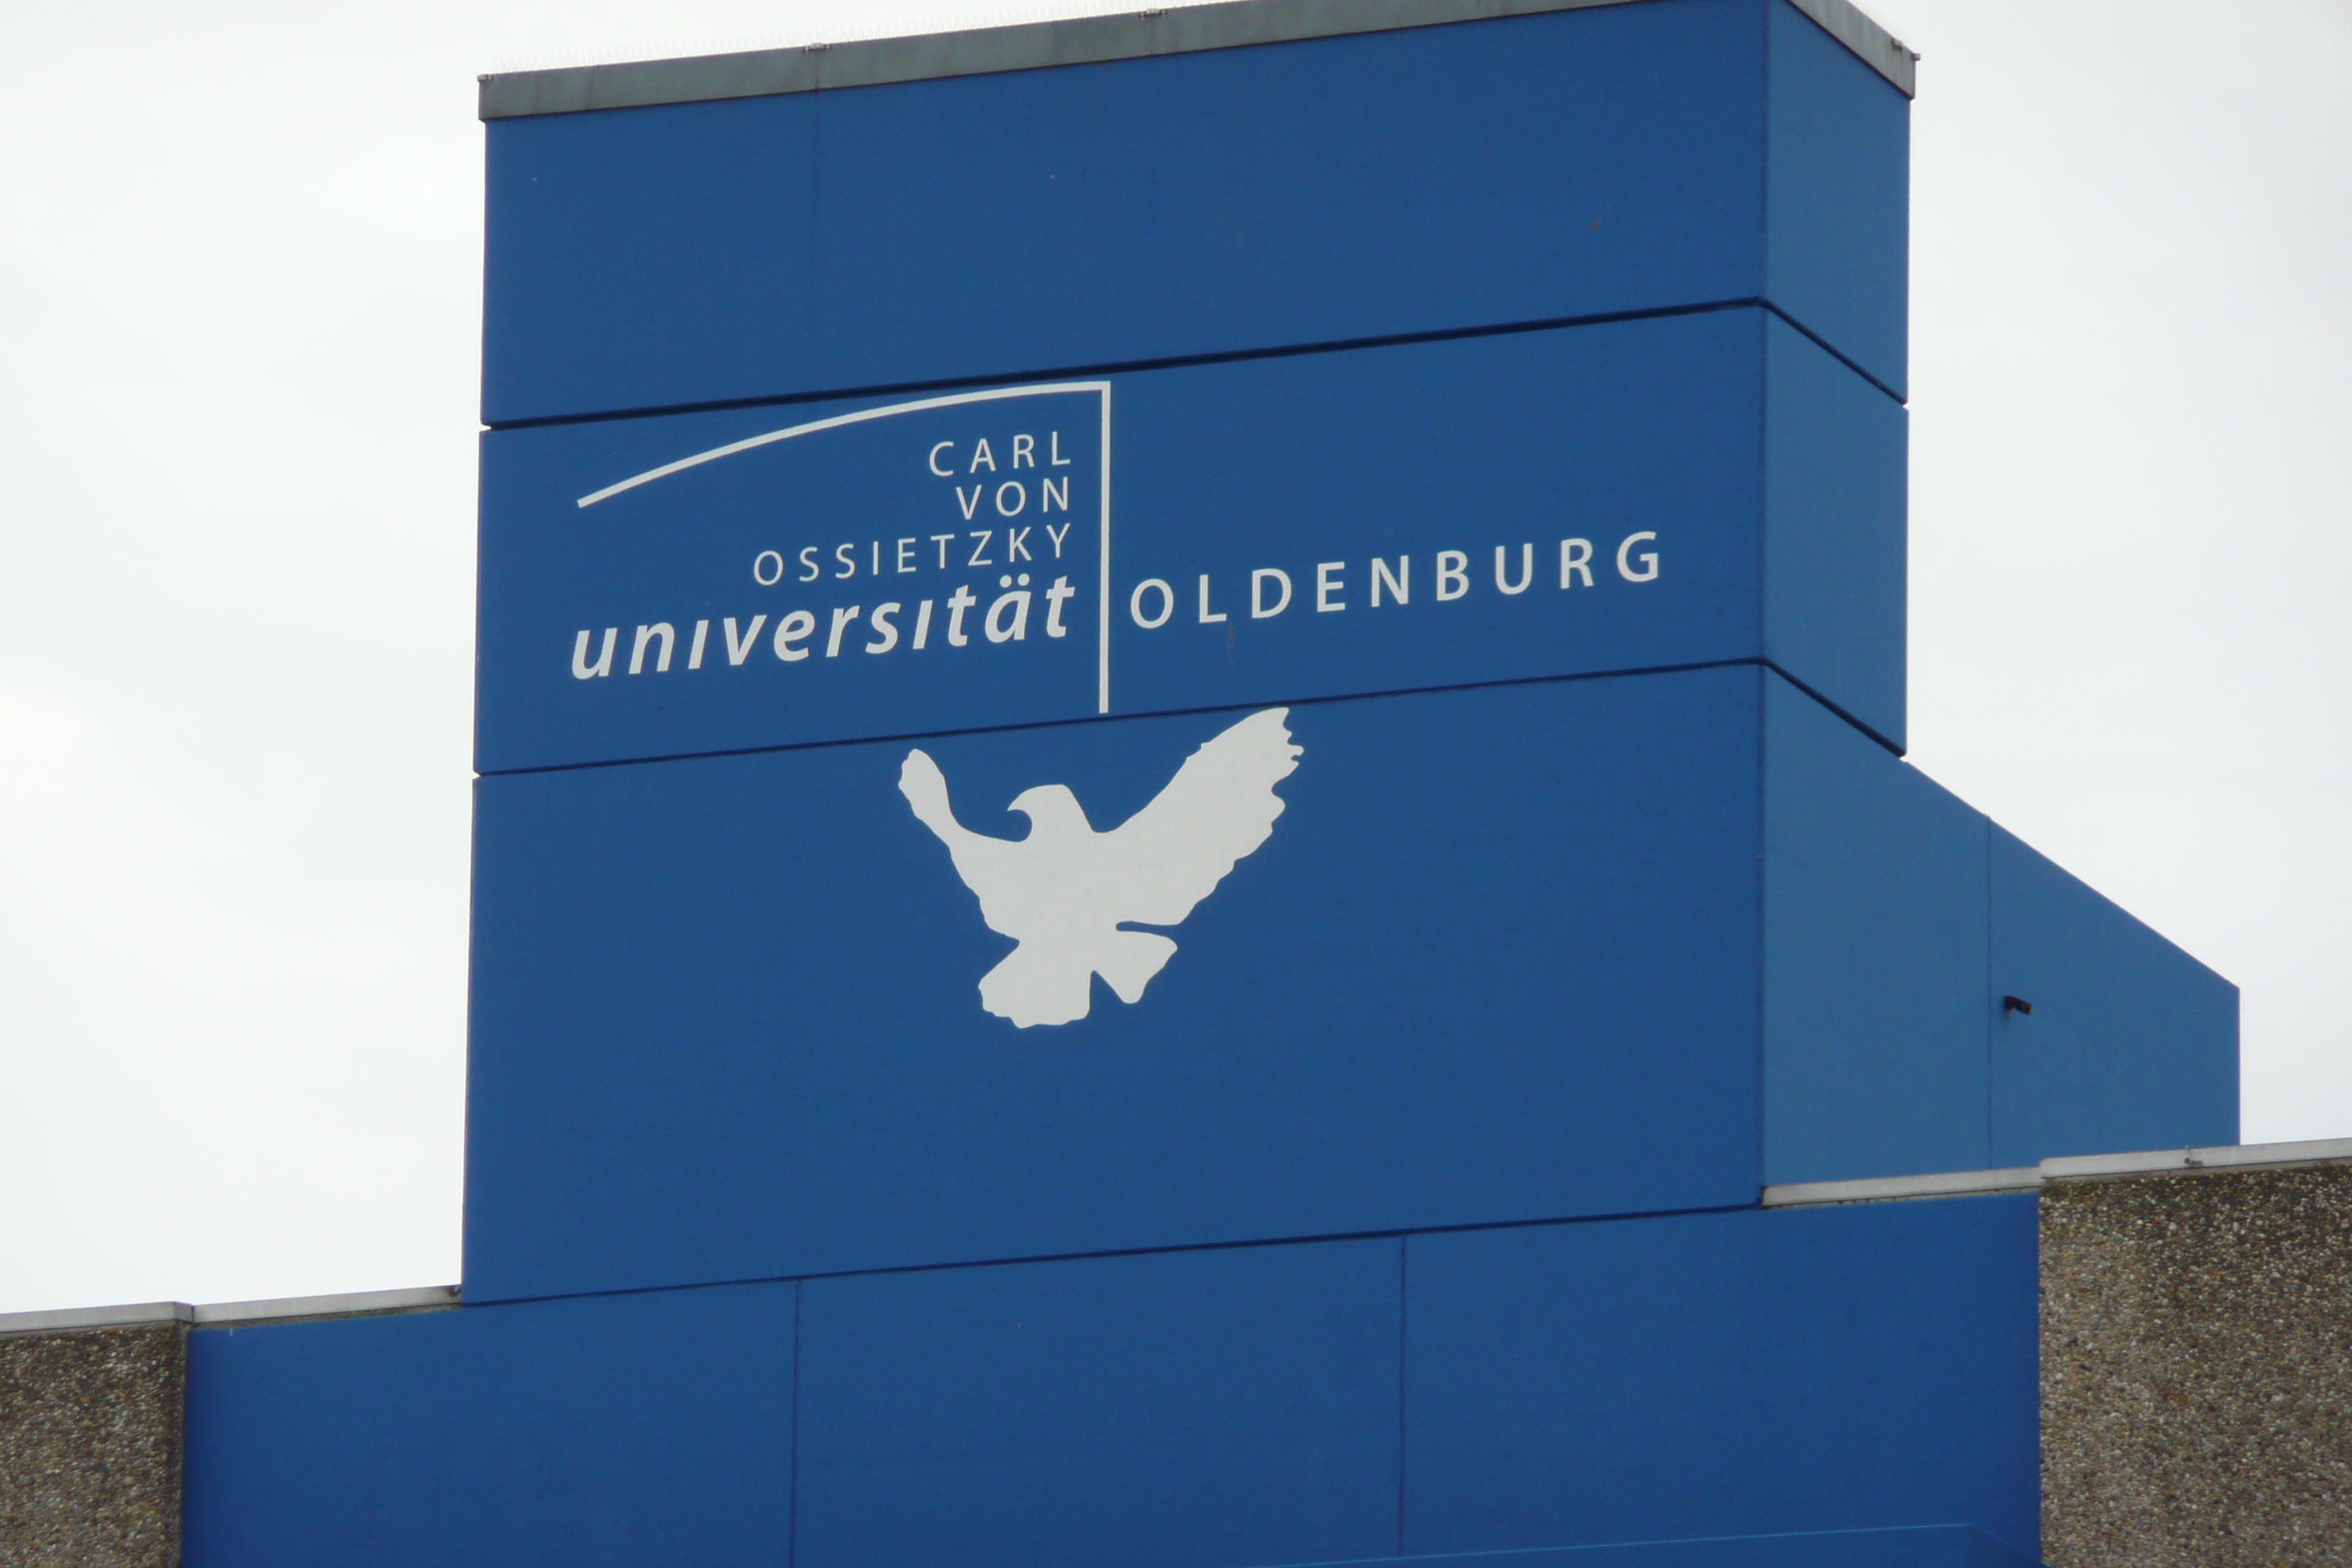 University of Oldenburg Wins EUR 3.8 Million for Offshore Wind Research Project (Germany)